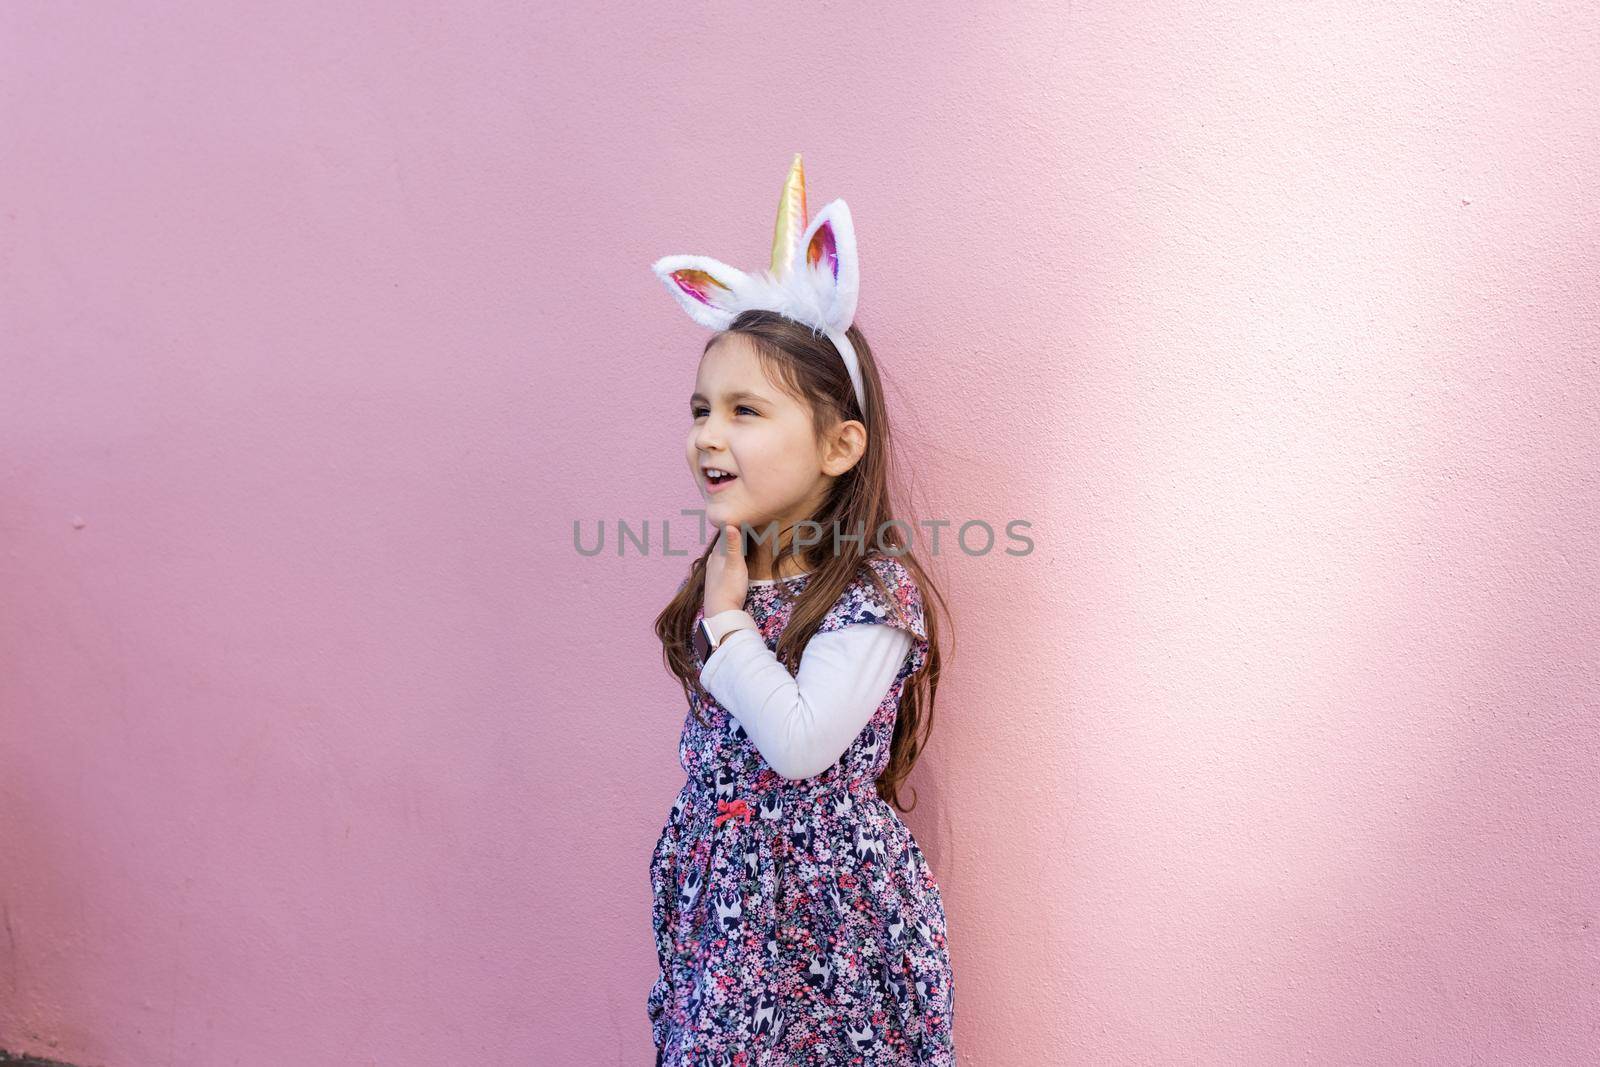 Adorable view of happy little girl wearing unicorn headband with pink background. Portrait of cute smiling child with unicorn horn and ears in front bright pink wall. Lovely kids in costumes